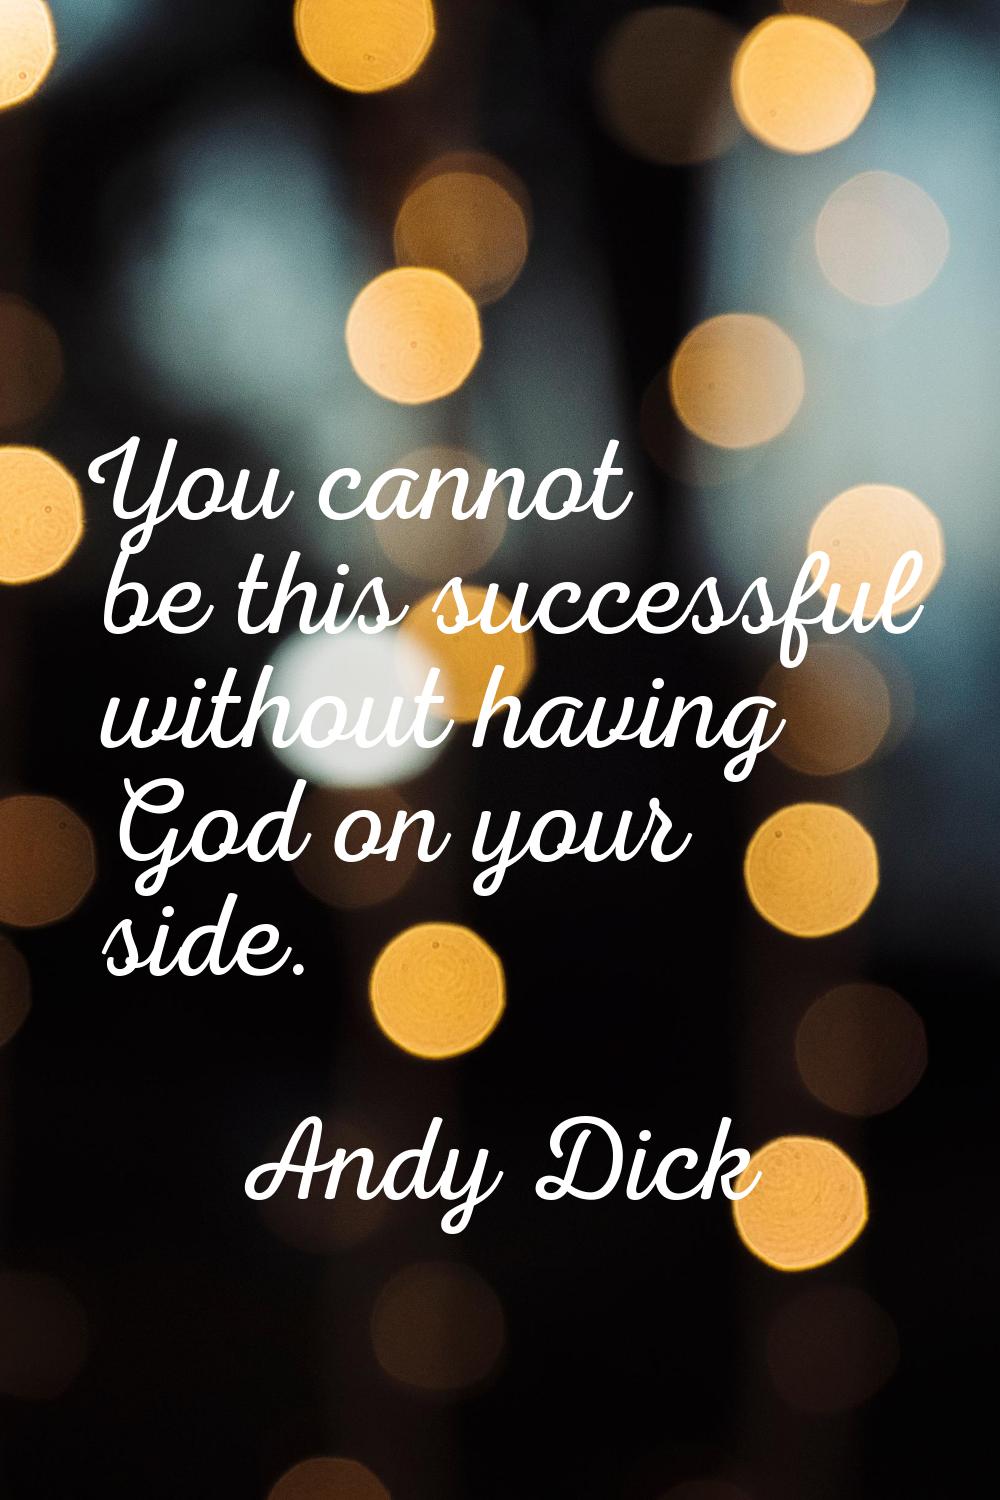 You cannot be this successful without having God on your side.